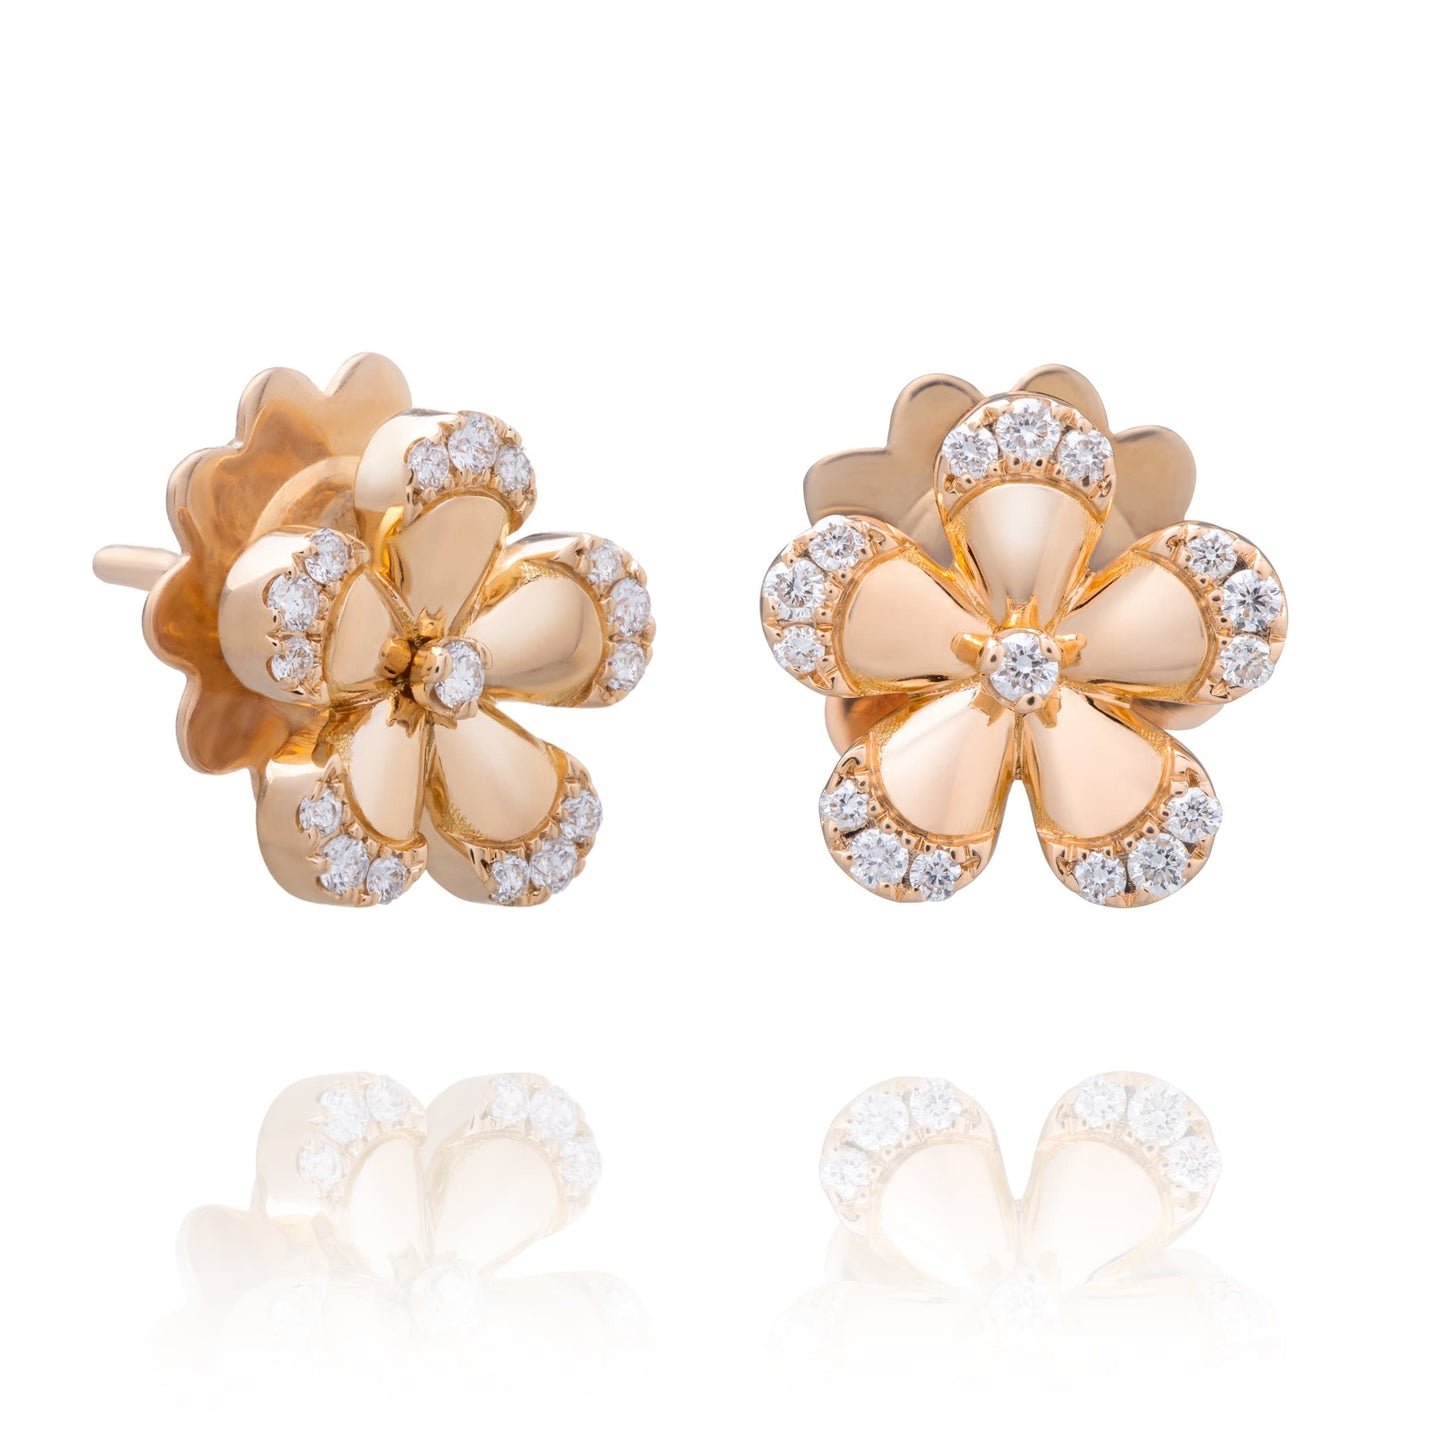 Dalia T Online Earrings Nature Collection 18KT Rose Gold Flower Stud Earrings with Diamonds